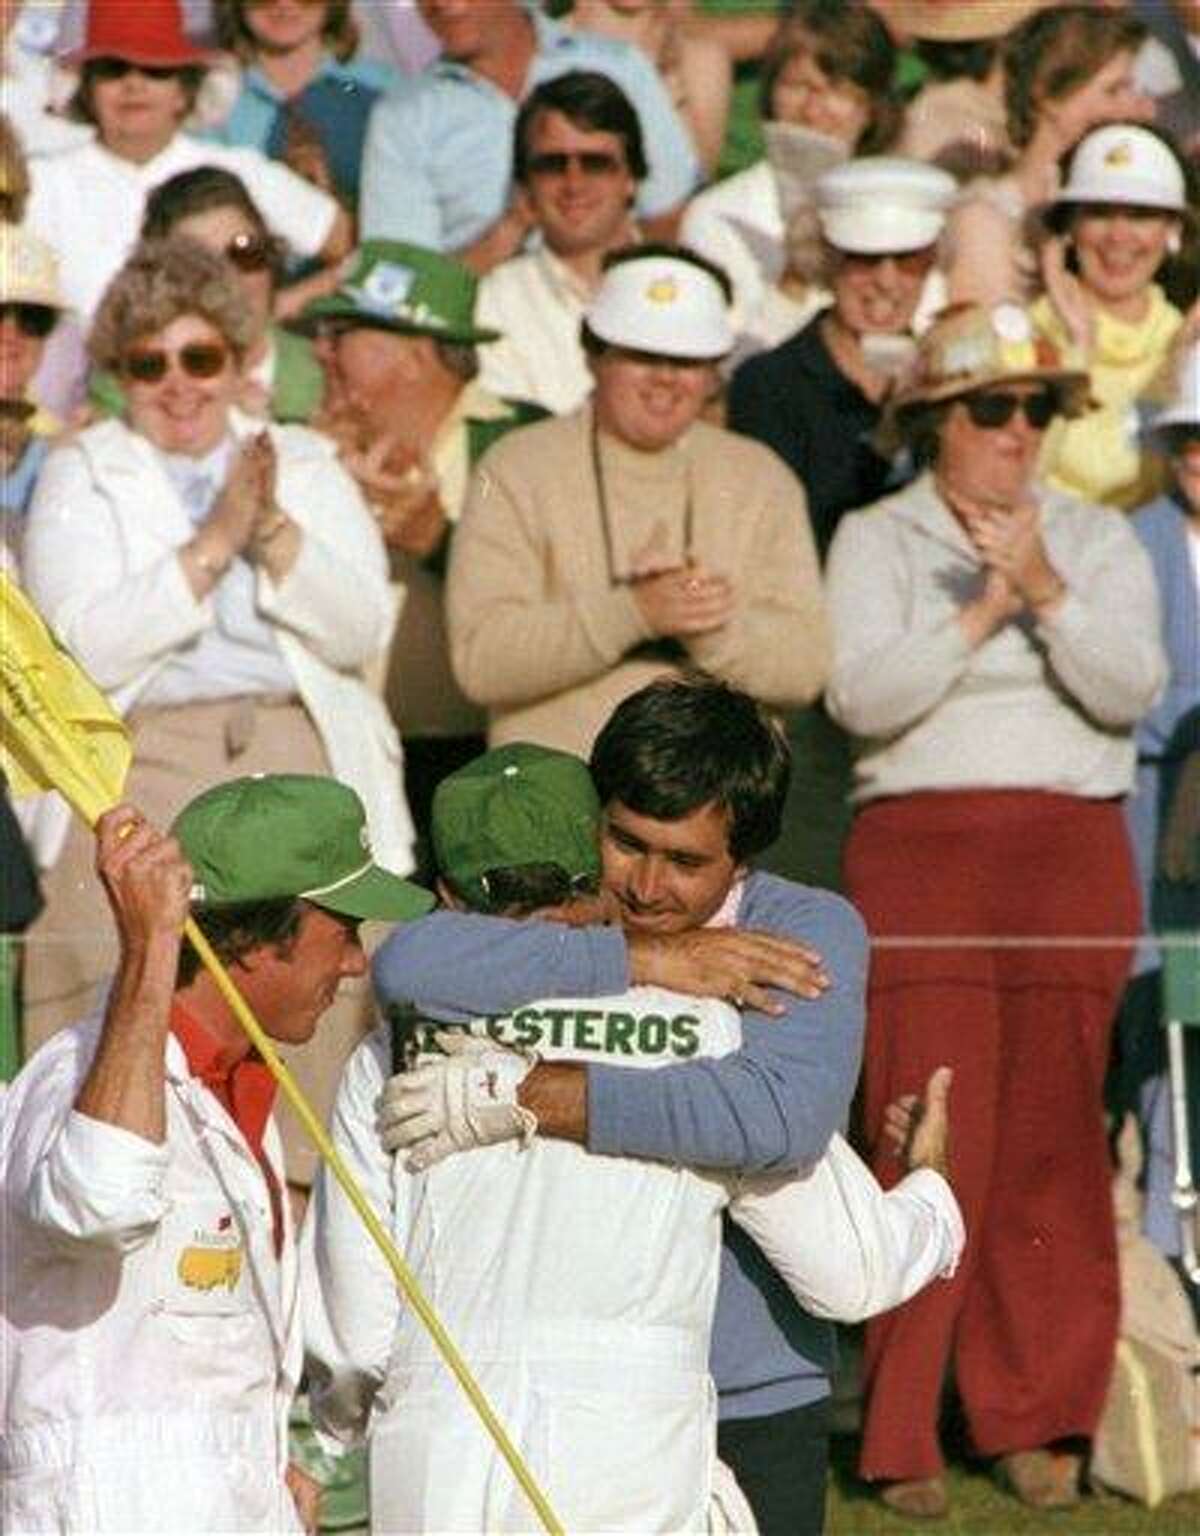 FILE - In this April 11, 1983 file photo, Seve Ballesteros, right, hugs his caddie after winning the Masters golf tournament in Augusta, Ga. Ballesteros died early Saturday, May 7, 2011, from complications of a cancerous brain tumor. He was 54. (AP Photo/File)